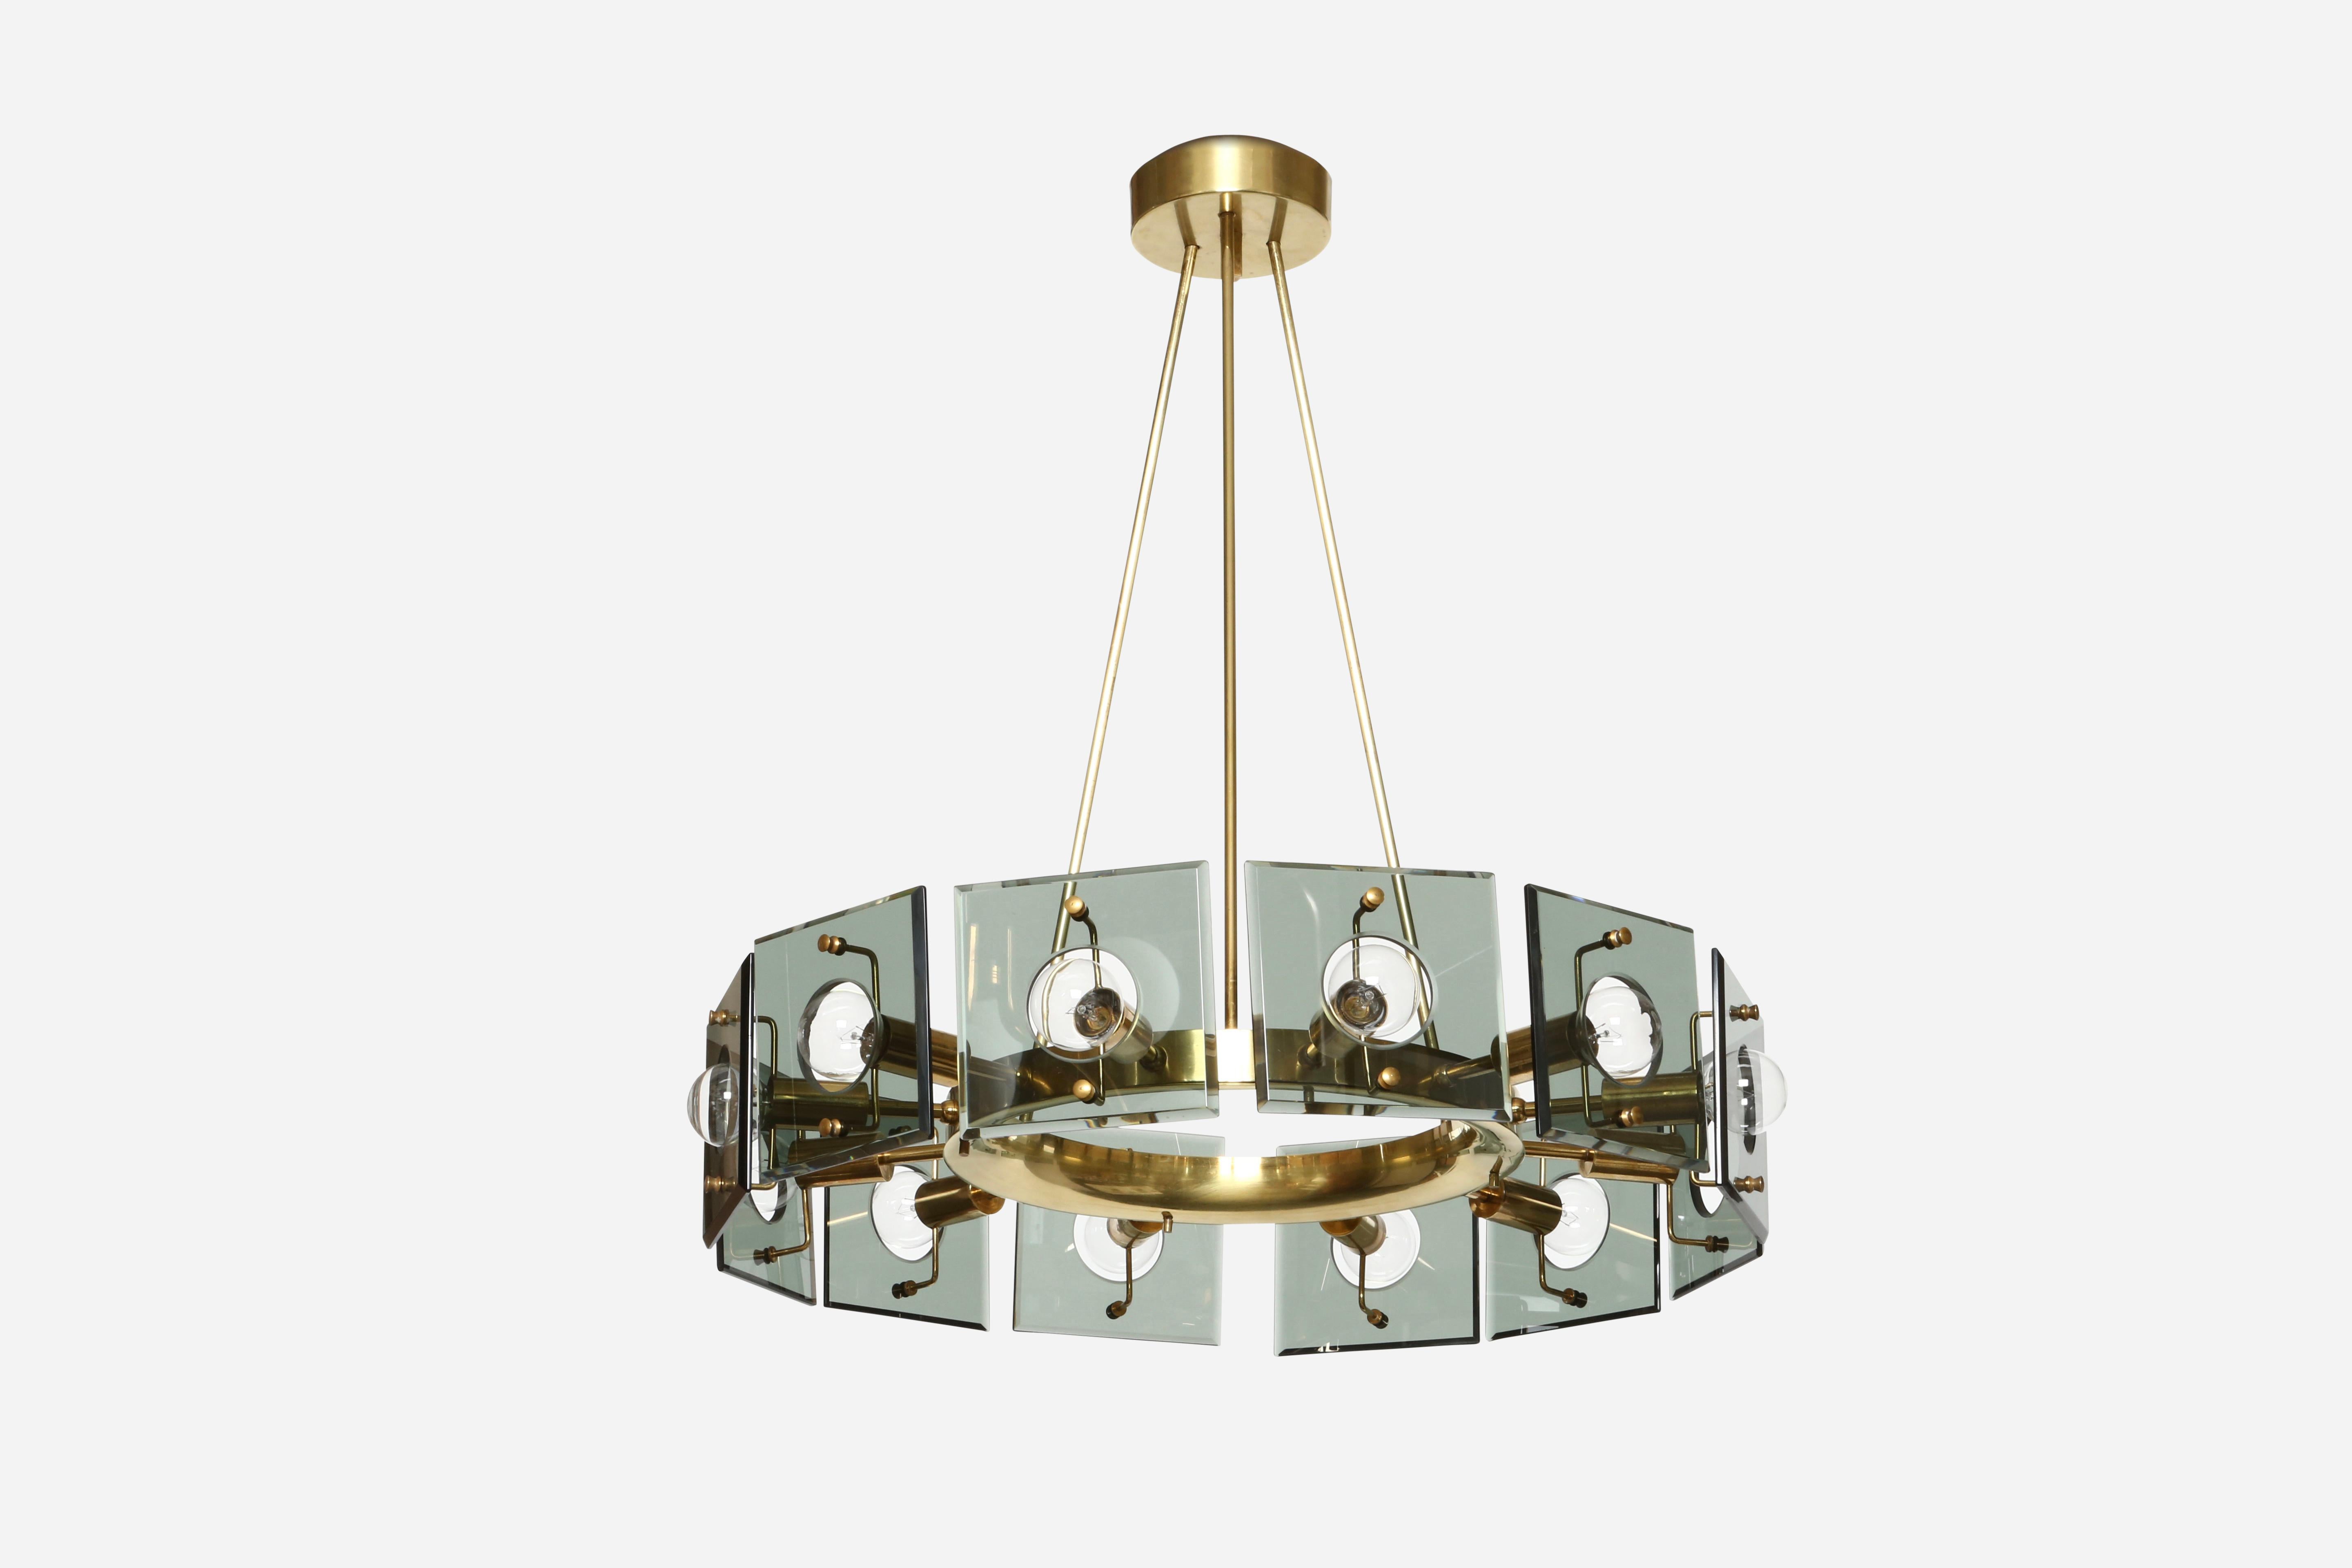 Chandelier by Gino Paroldo.
Designed and made in Italy in 1960s.
Brass frame and crystal glass.
12 Candelabra base sockets.
Complimentary US rewiring upon request.
Height adjustable, stems can be shortened.
 